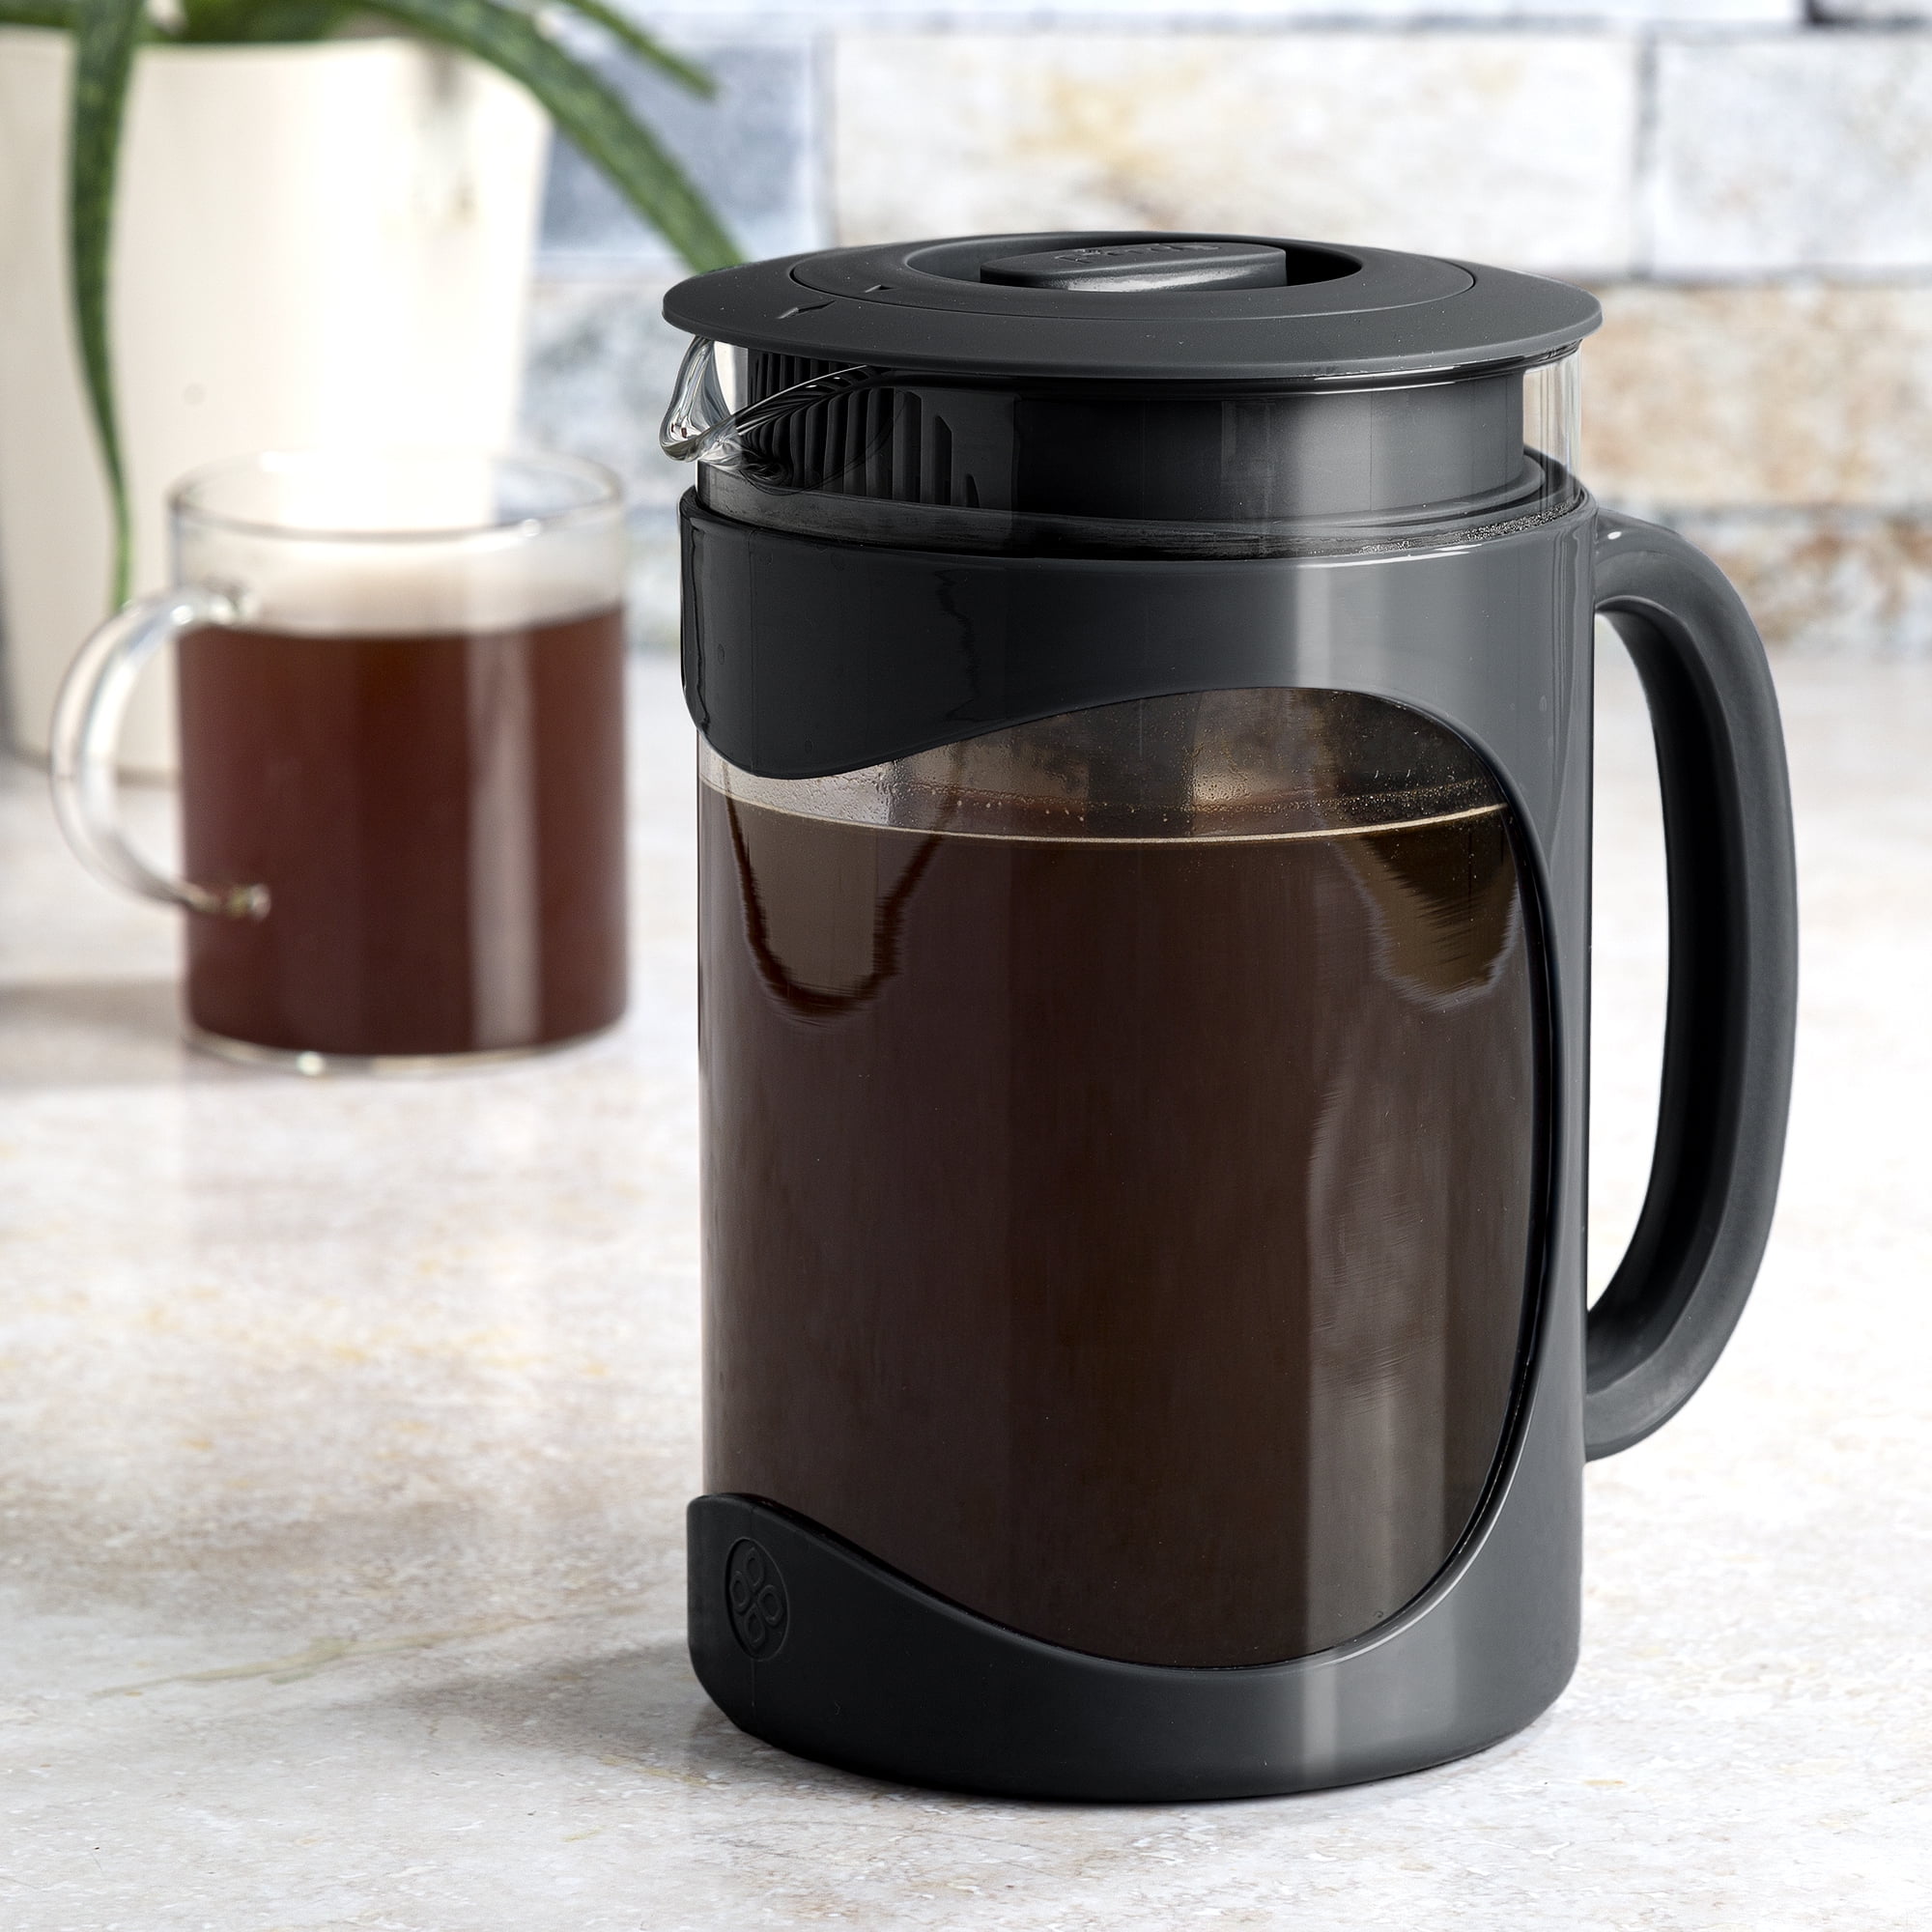 1-Gallon Cold Brew Coffee Maker and Dispenser by “Brew To A Tea